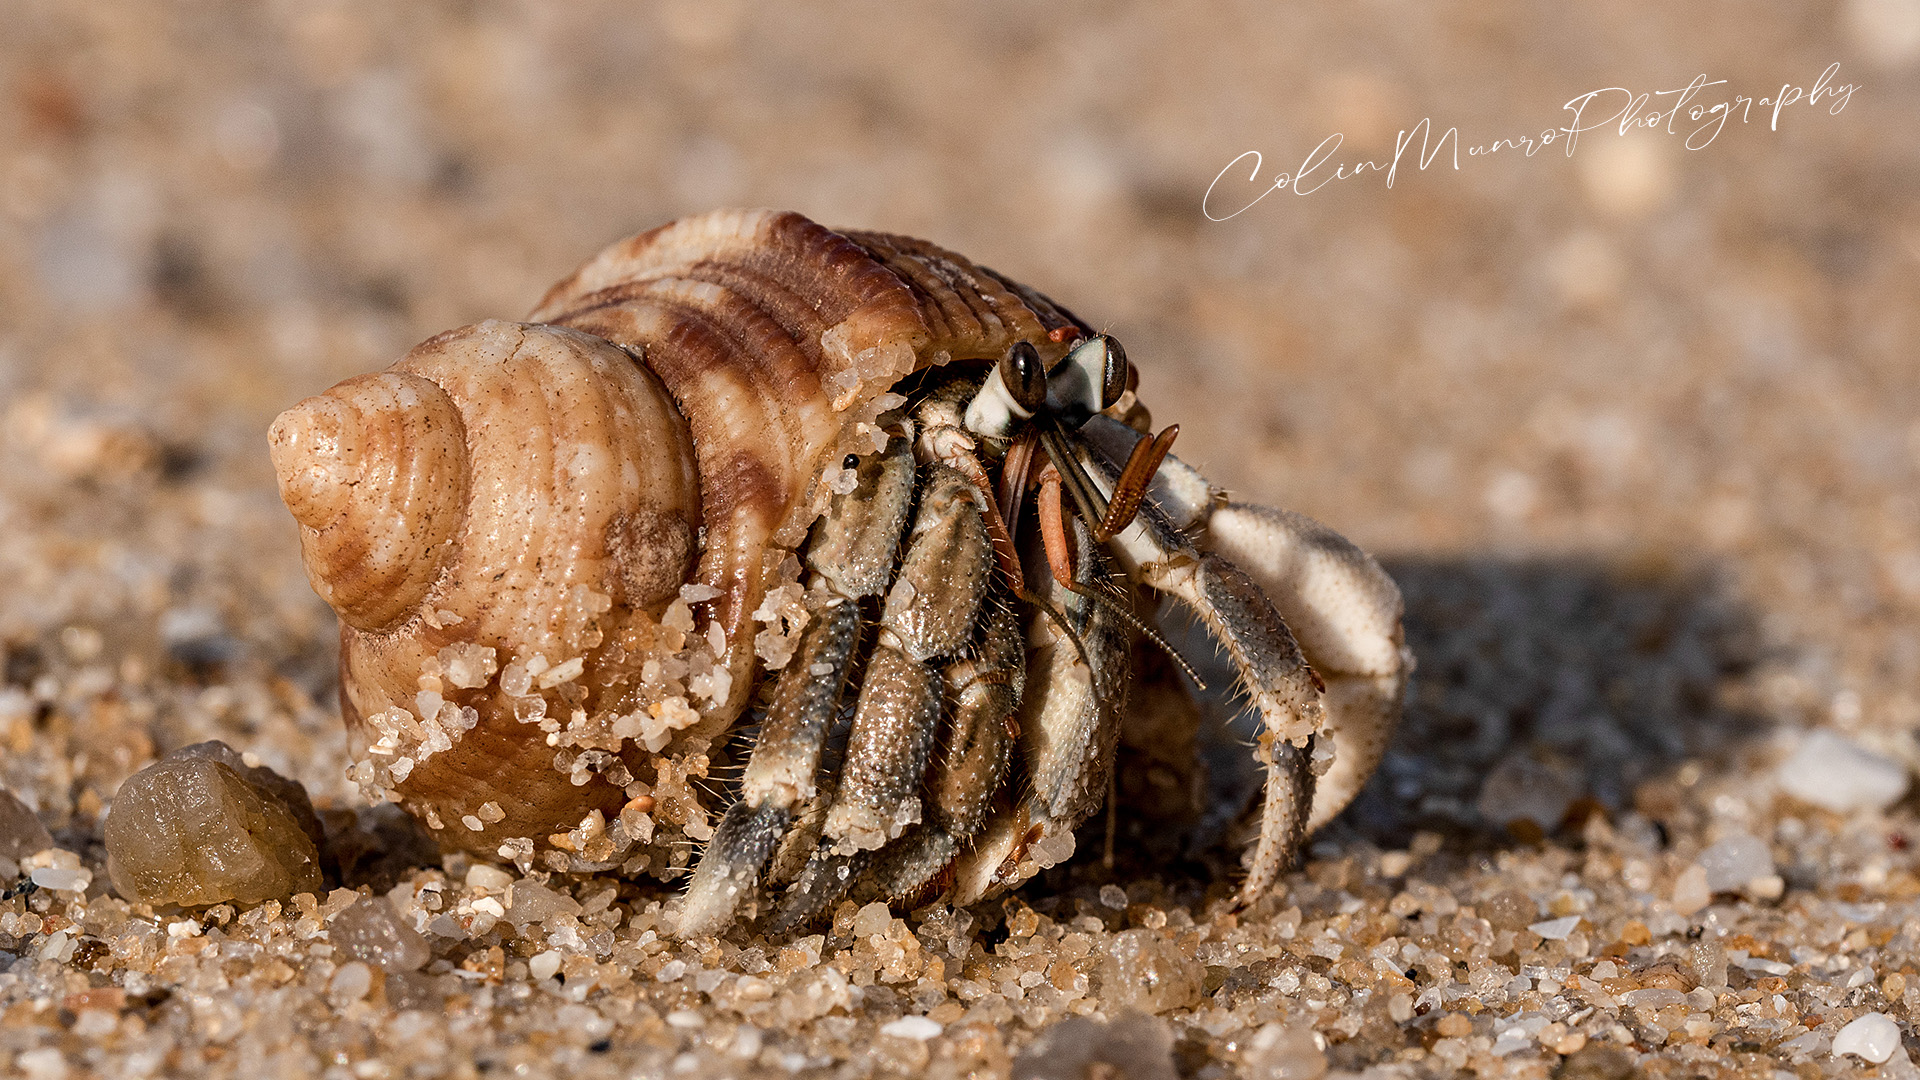 A land hermit crab, Coenobita rugosus, walking just above the waves at high tide, on a beach in Phuket, Thailand.